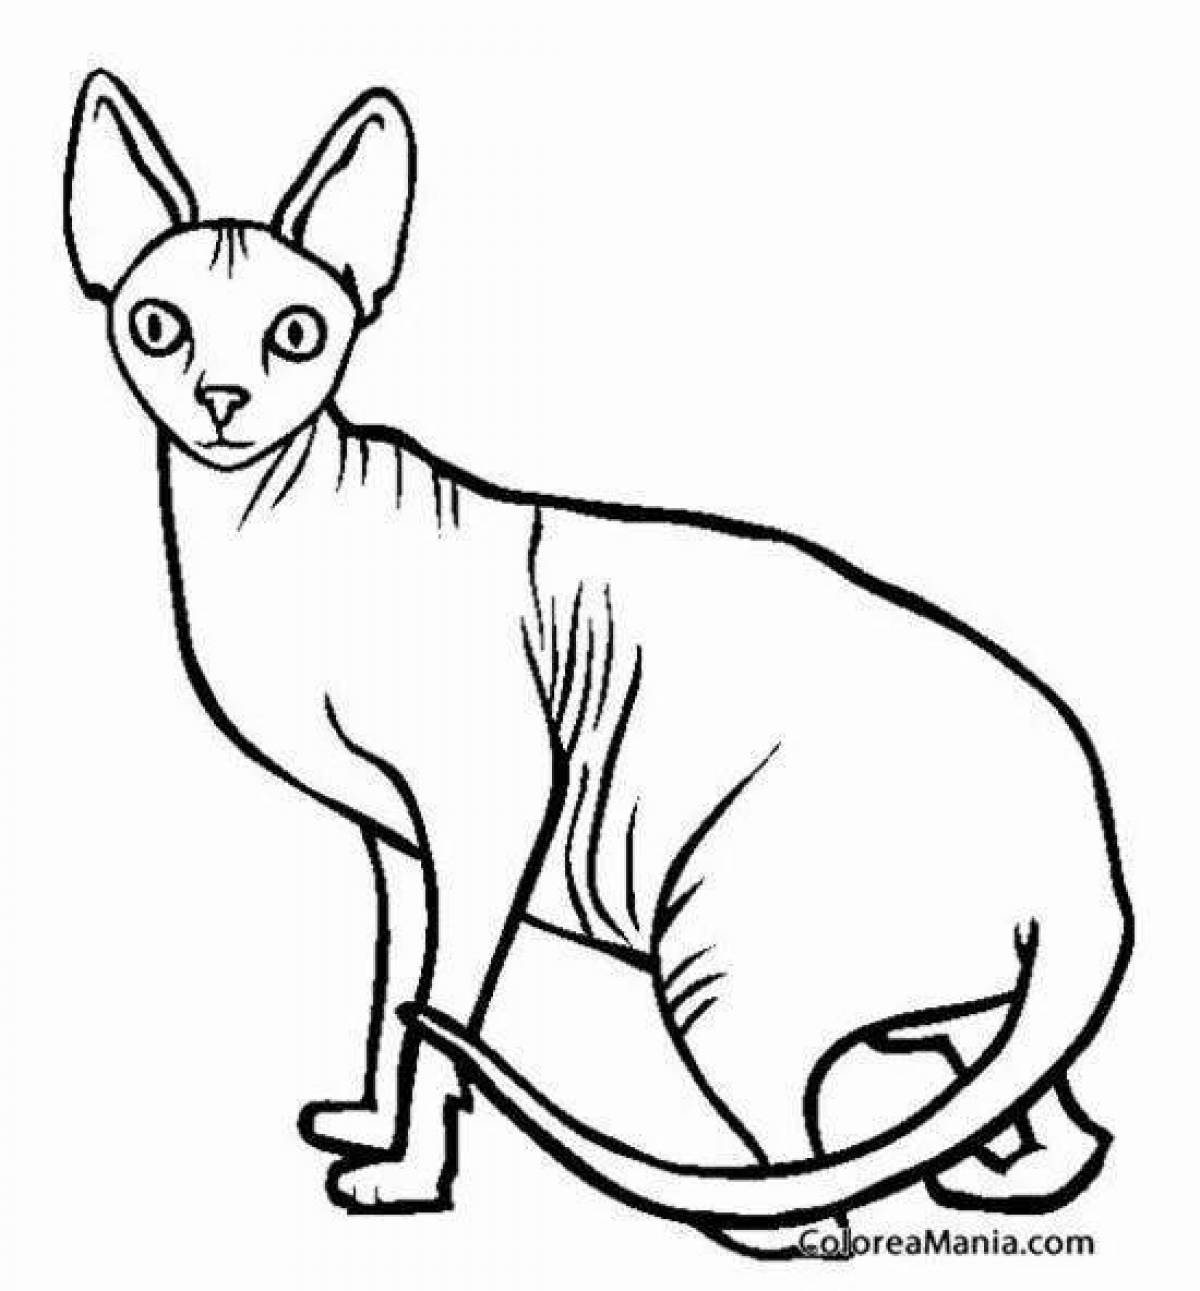 Delightful coloring of the Sphynx cat